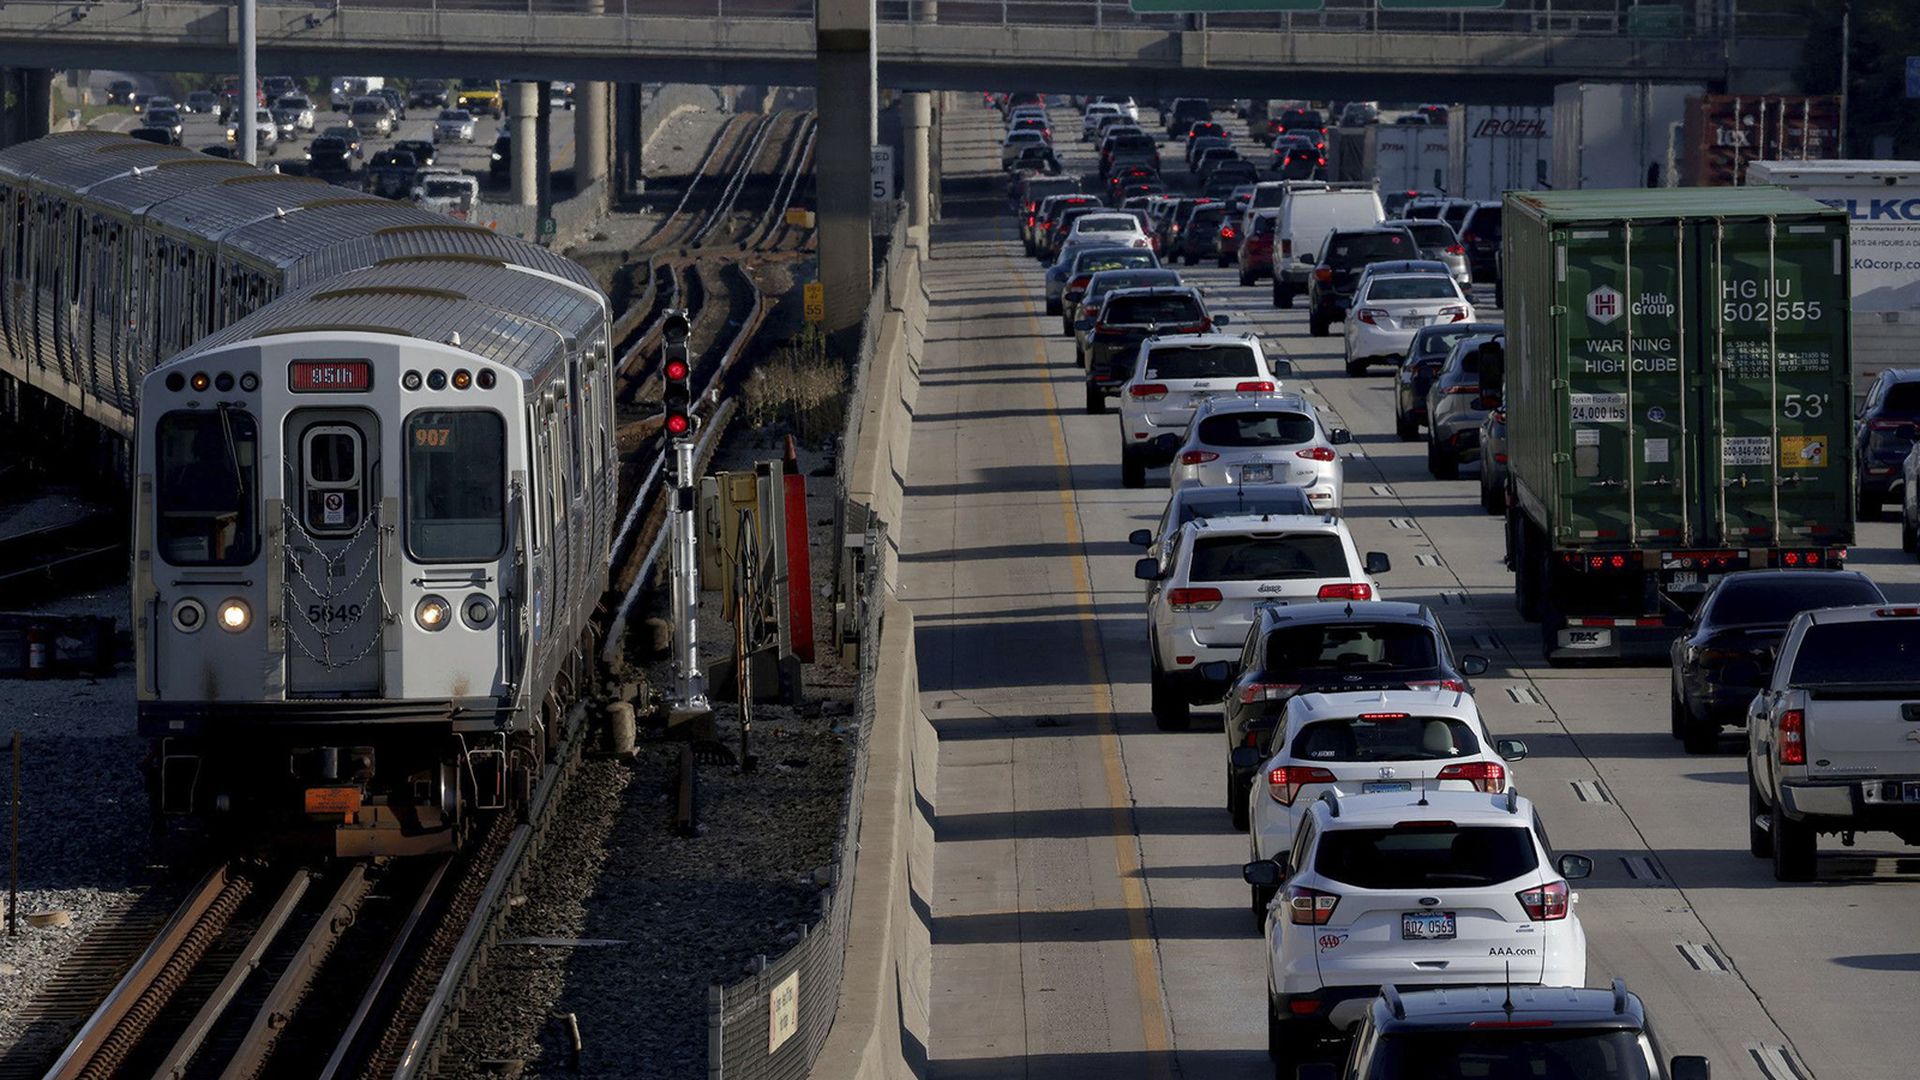 A CTA train on the left next to the expressway where traffic is bumper to bumper.